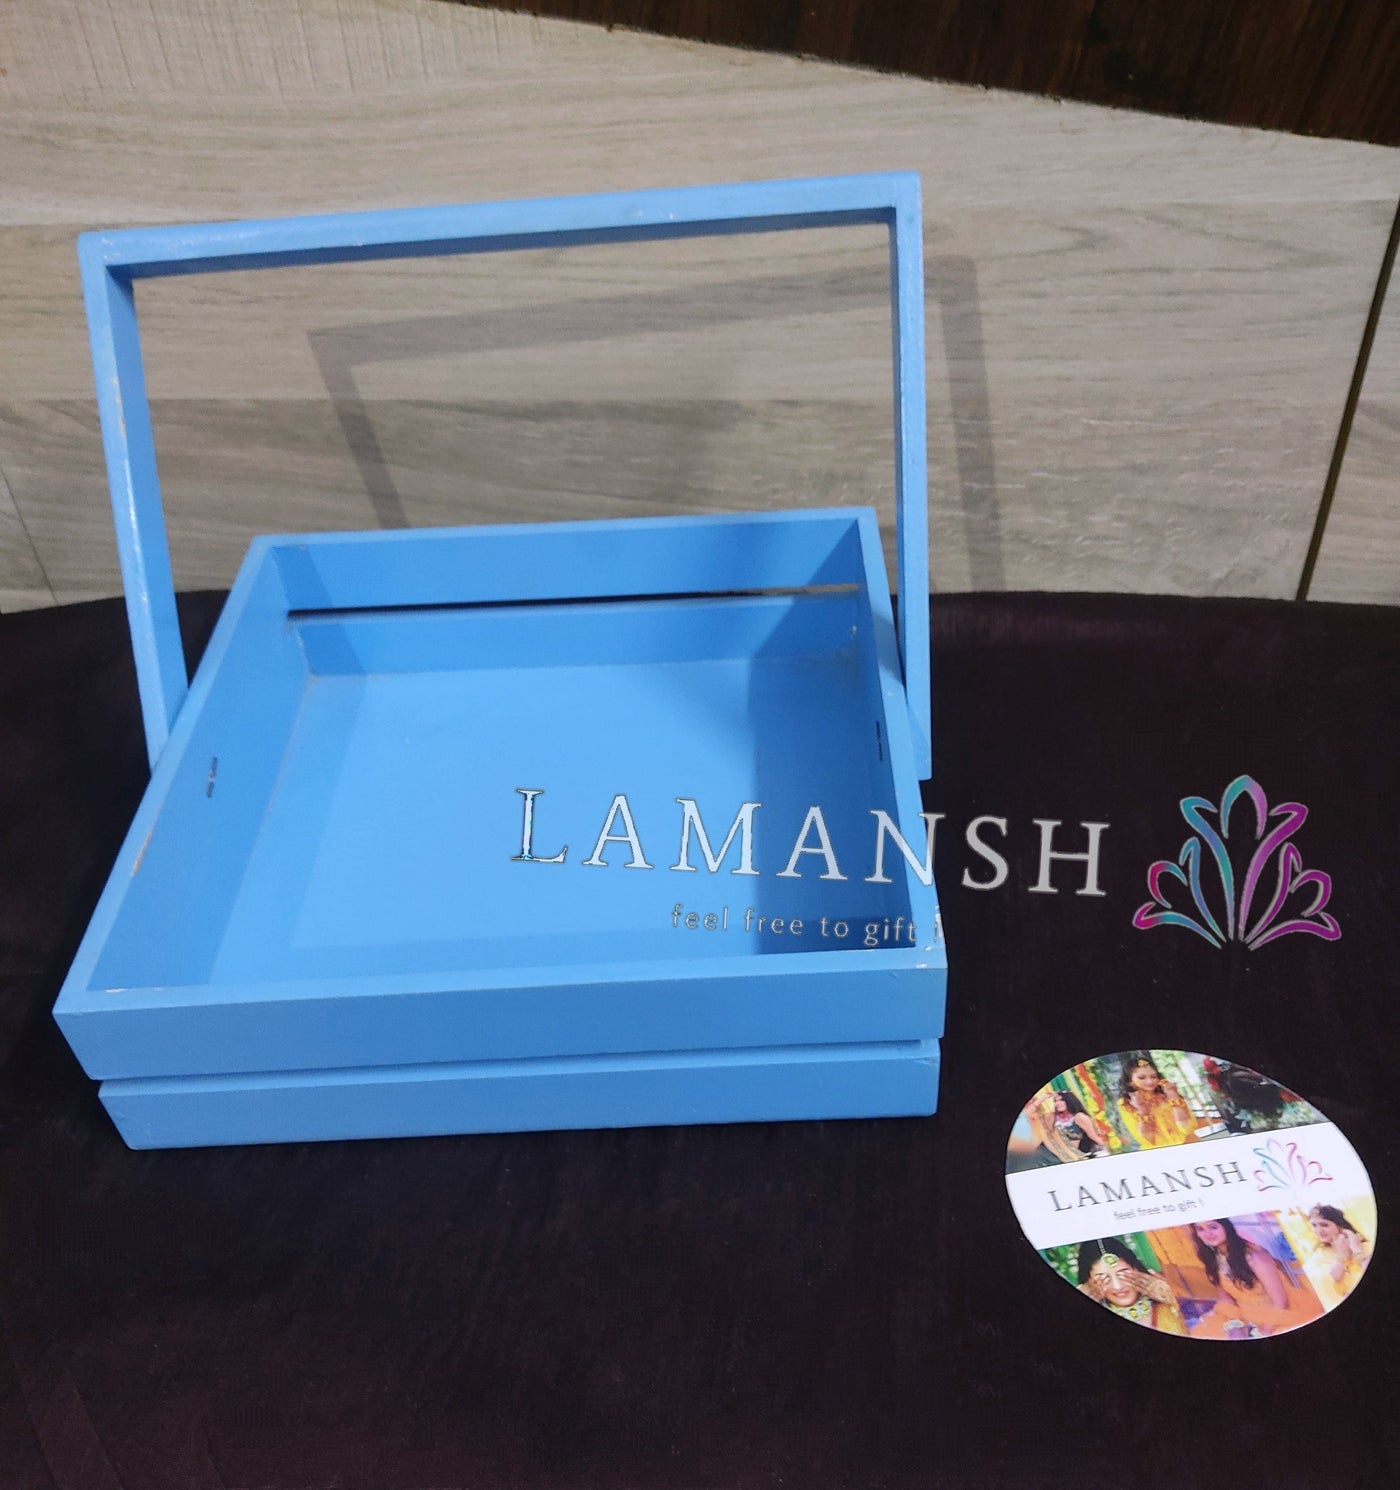 Lamansh pinewood baskets tray LAMANSH® 10×10 inch Square Pinewood Tray with handle for Gifting 🎁 & Giveaways Tray platter for serving gifts packing / Ethnic pinewood basket in assorted colors